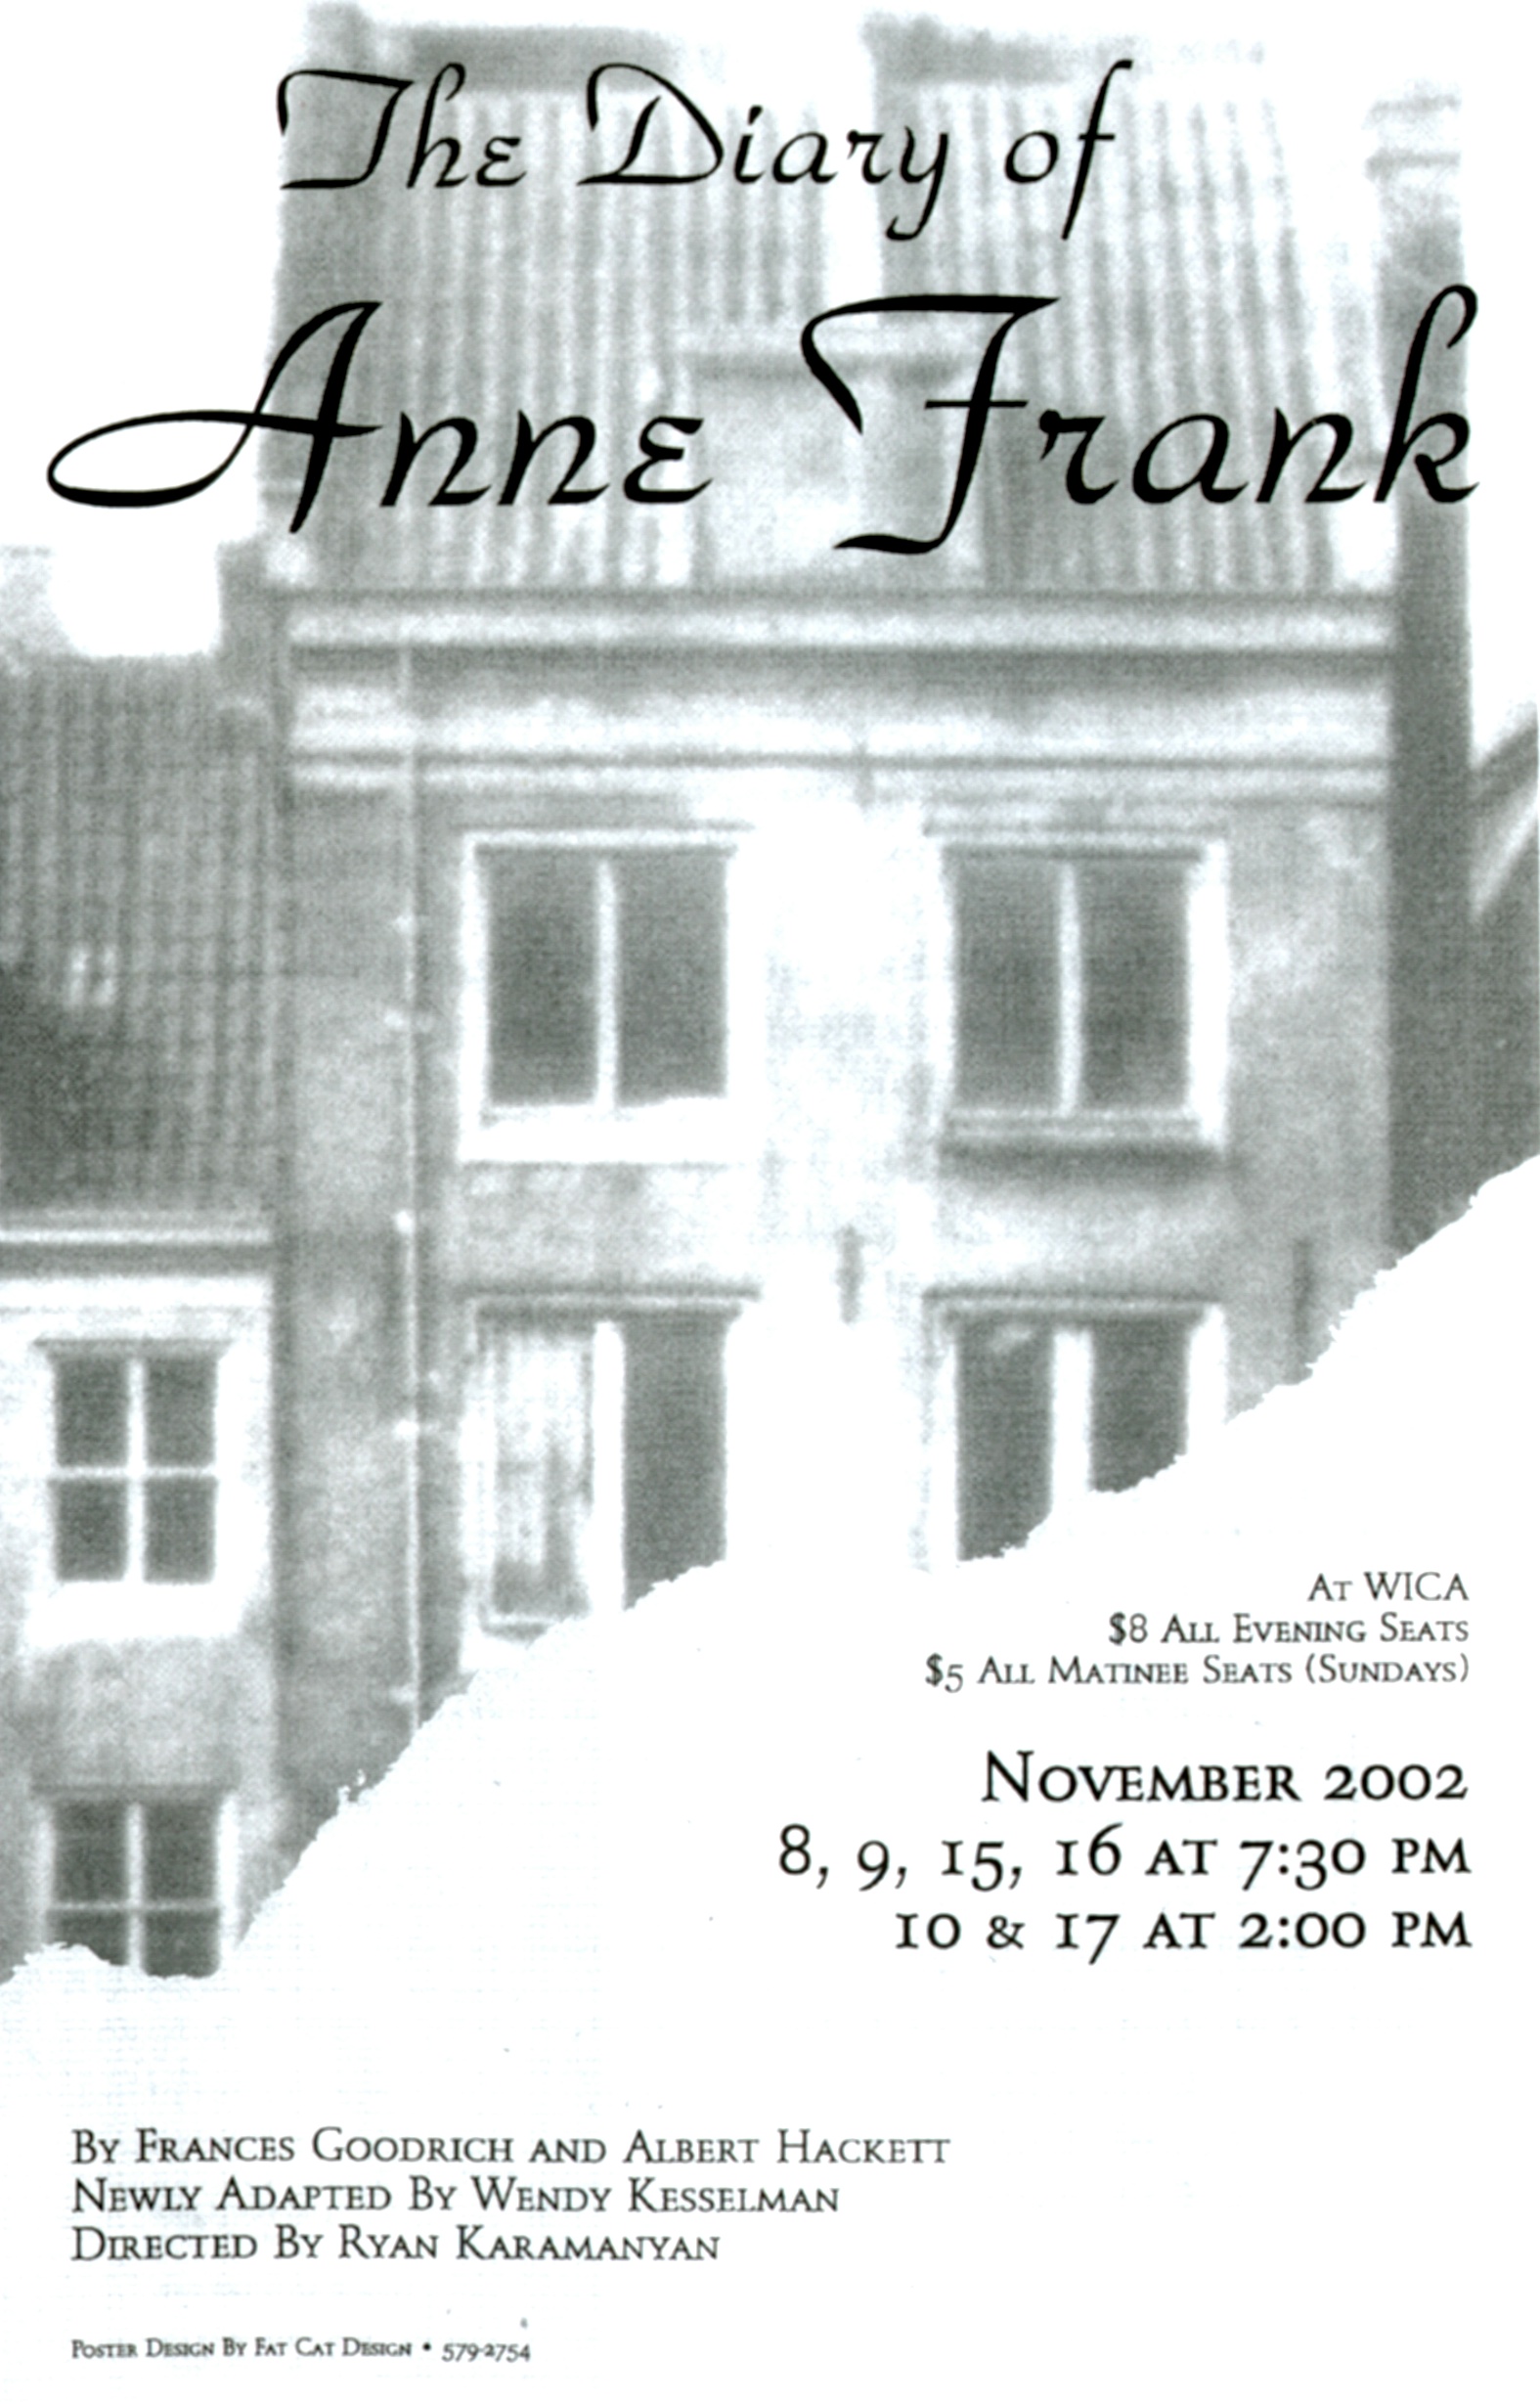 Page 1 of Theater Program - Enlarged